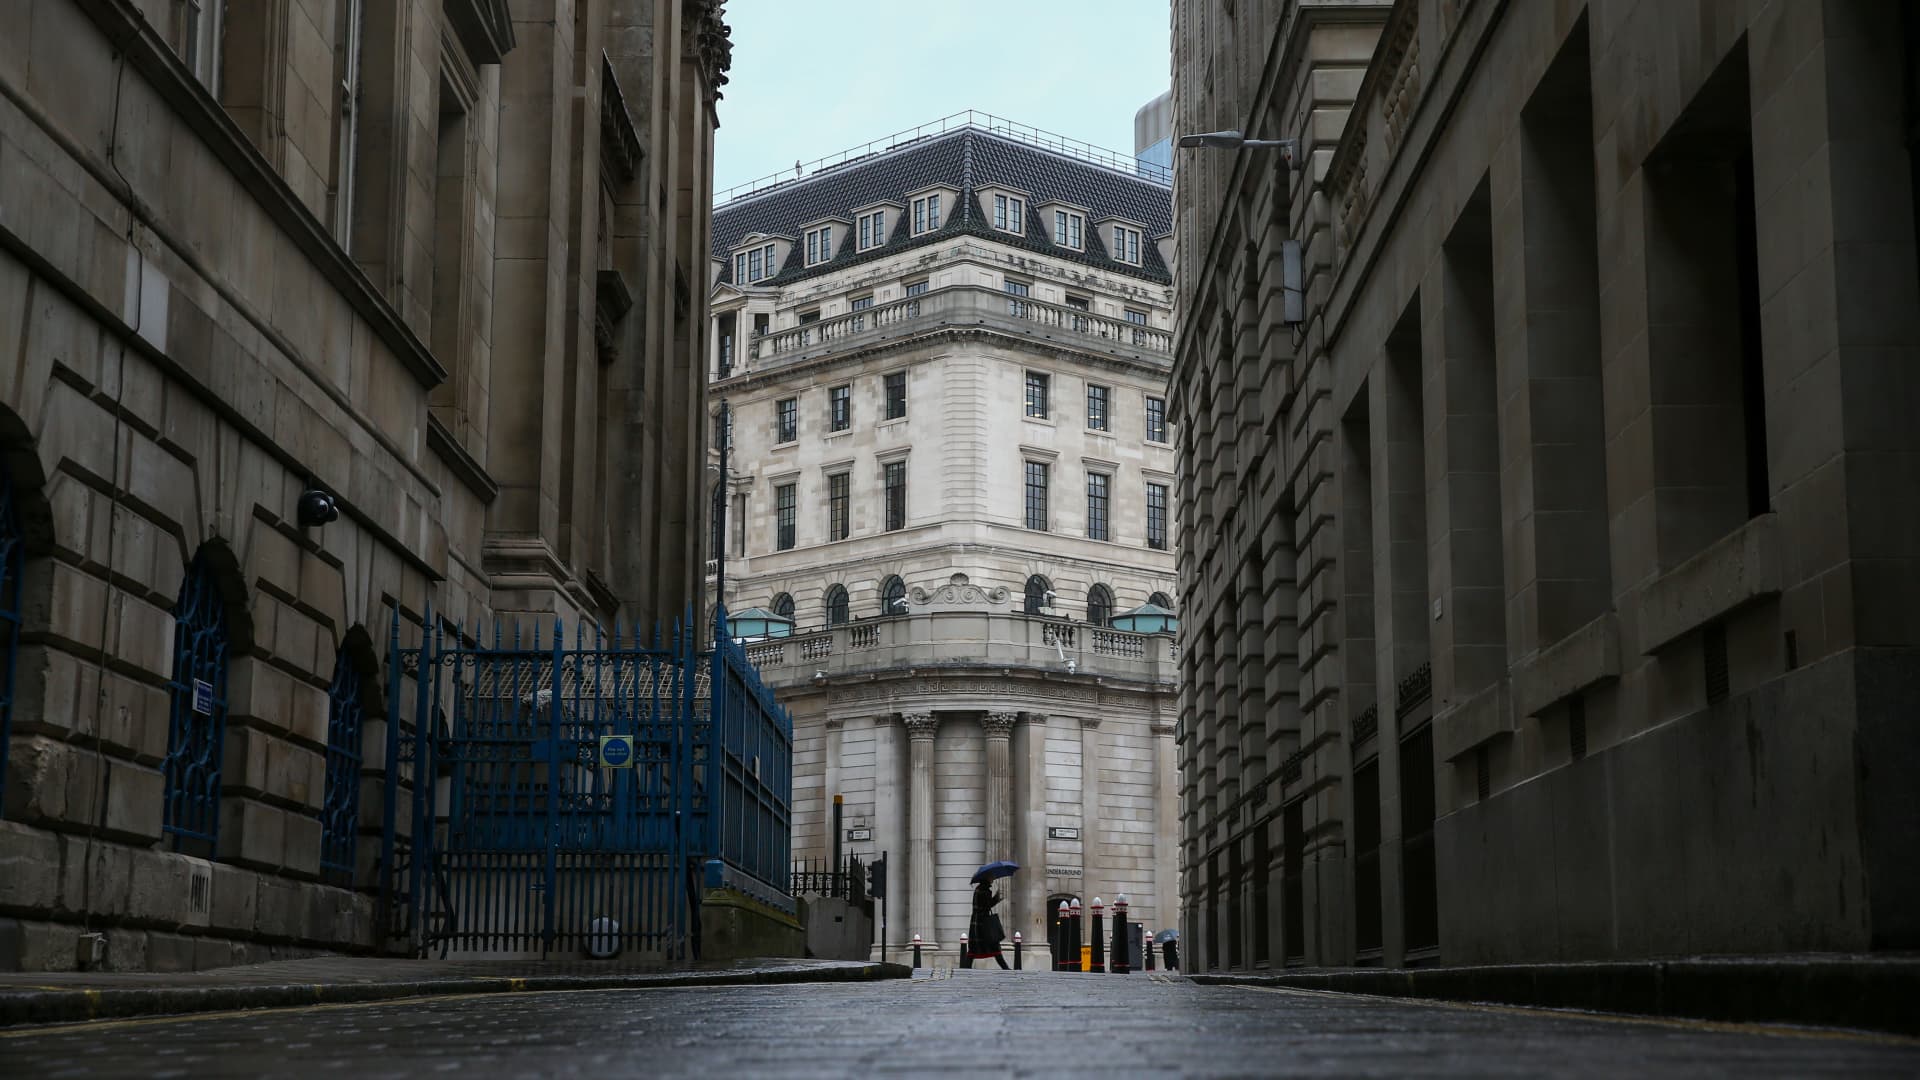 Bank of England raises its benchmark rate by 75 basis points its biggest hike in 33 years – CNBC